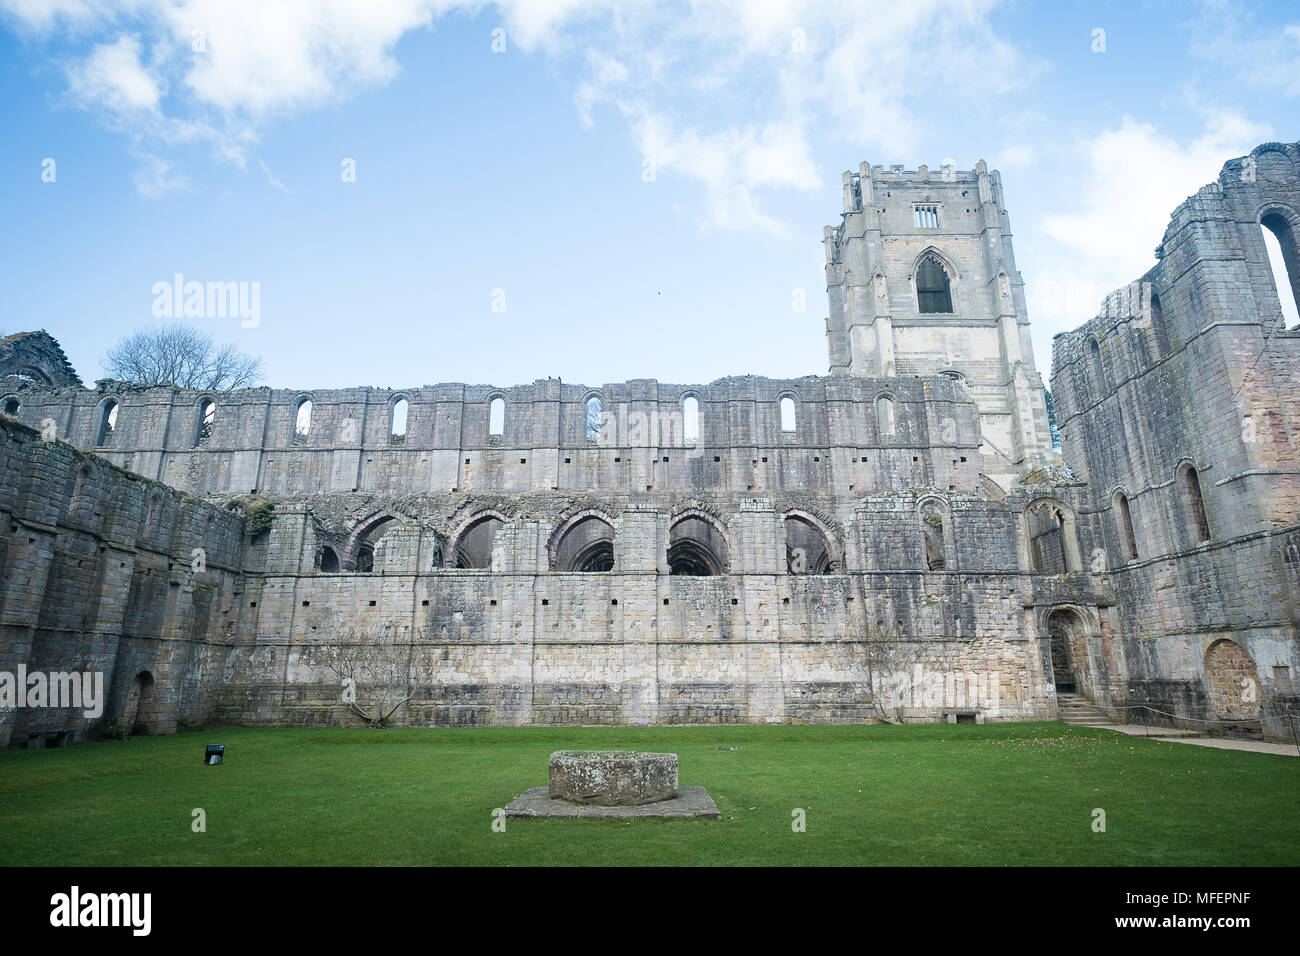 Fountains Abbey, Studley Royal, North Yorkshire, National Trust property, England, UK Stock Photo